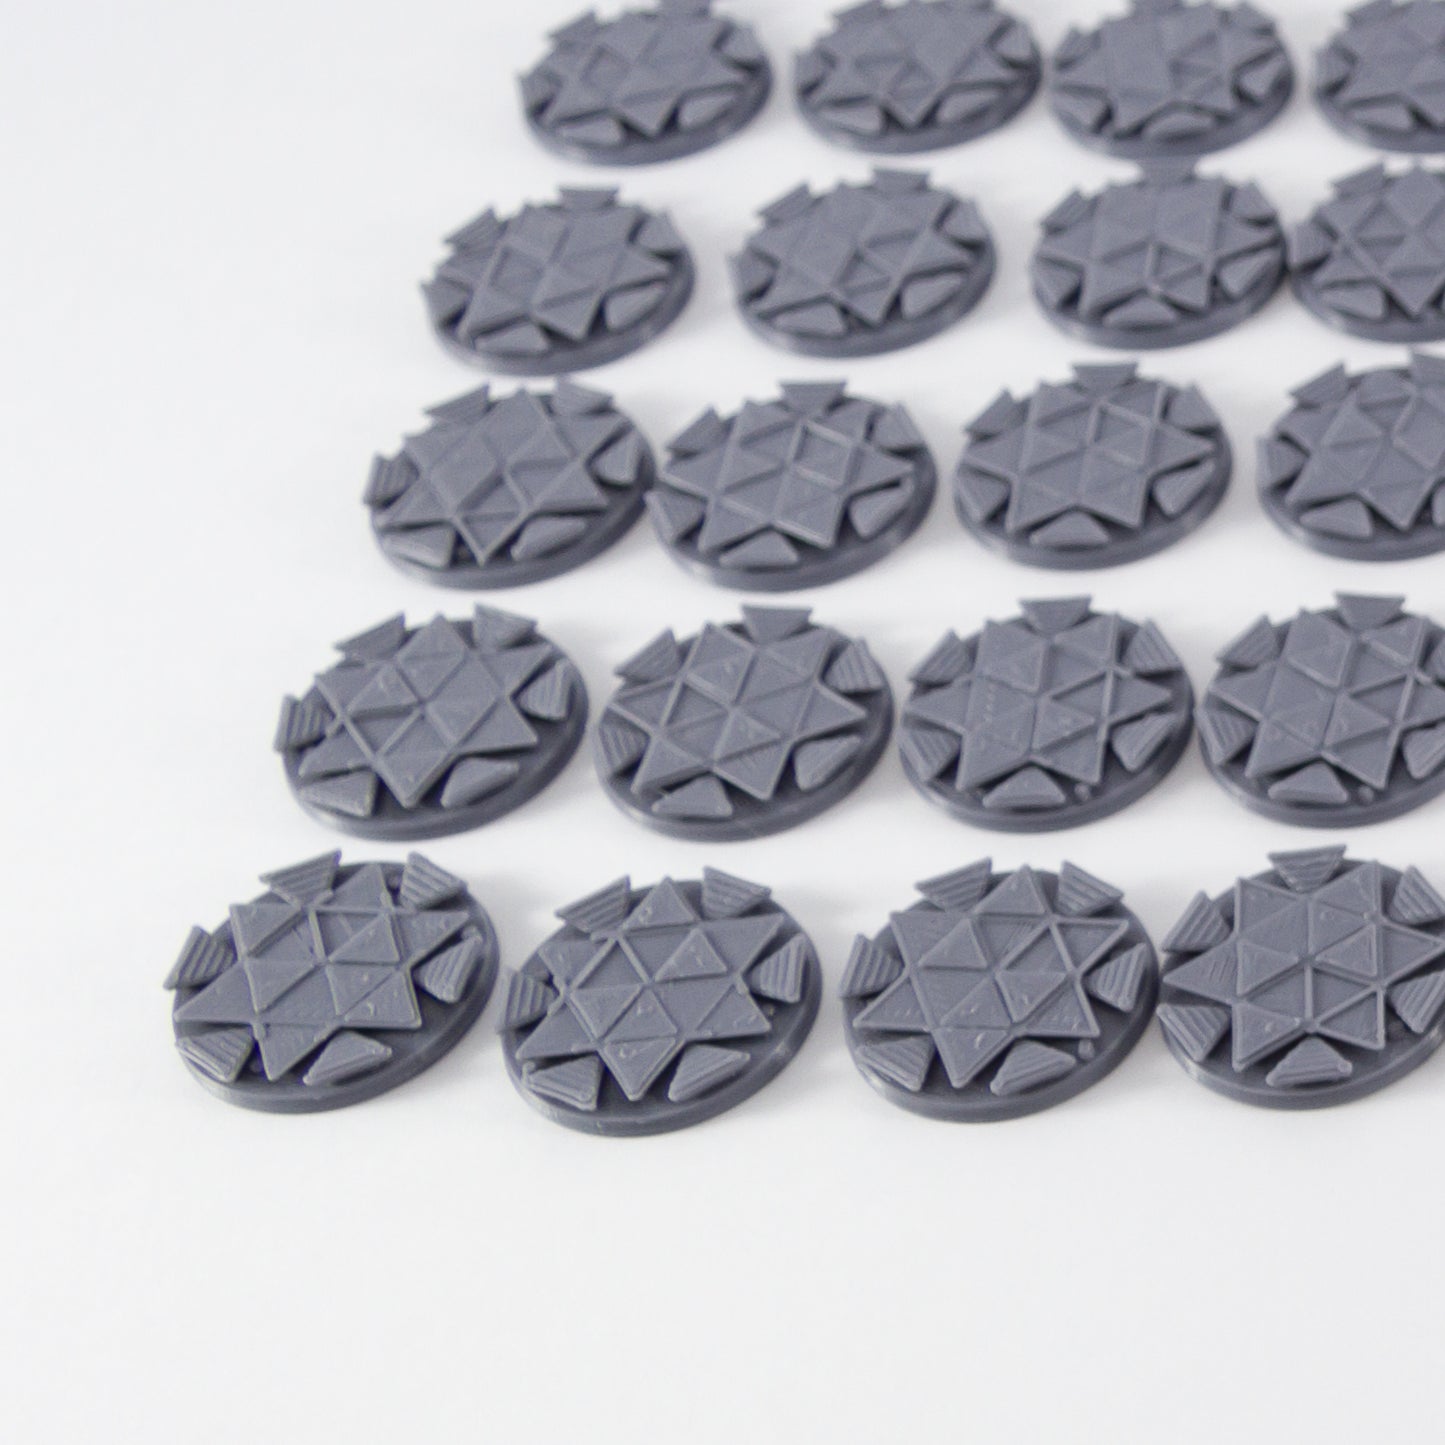 Set of 65 Bases Suitable for Blackstone Fortress 28mm Miniatures